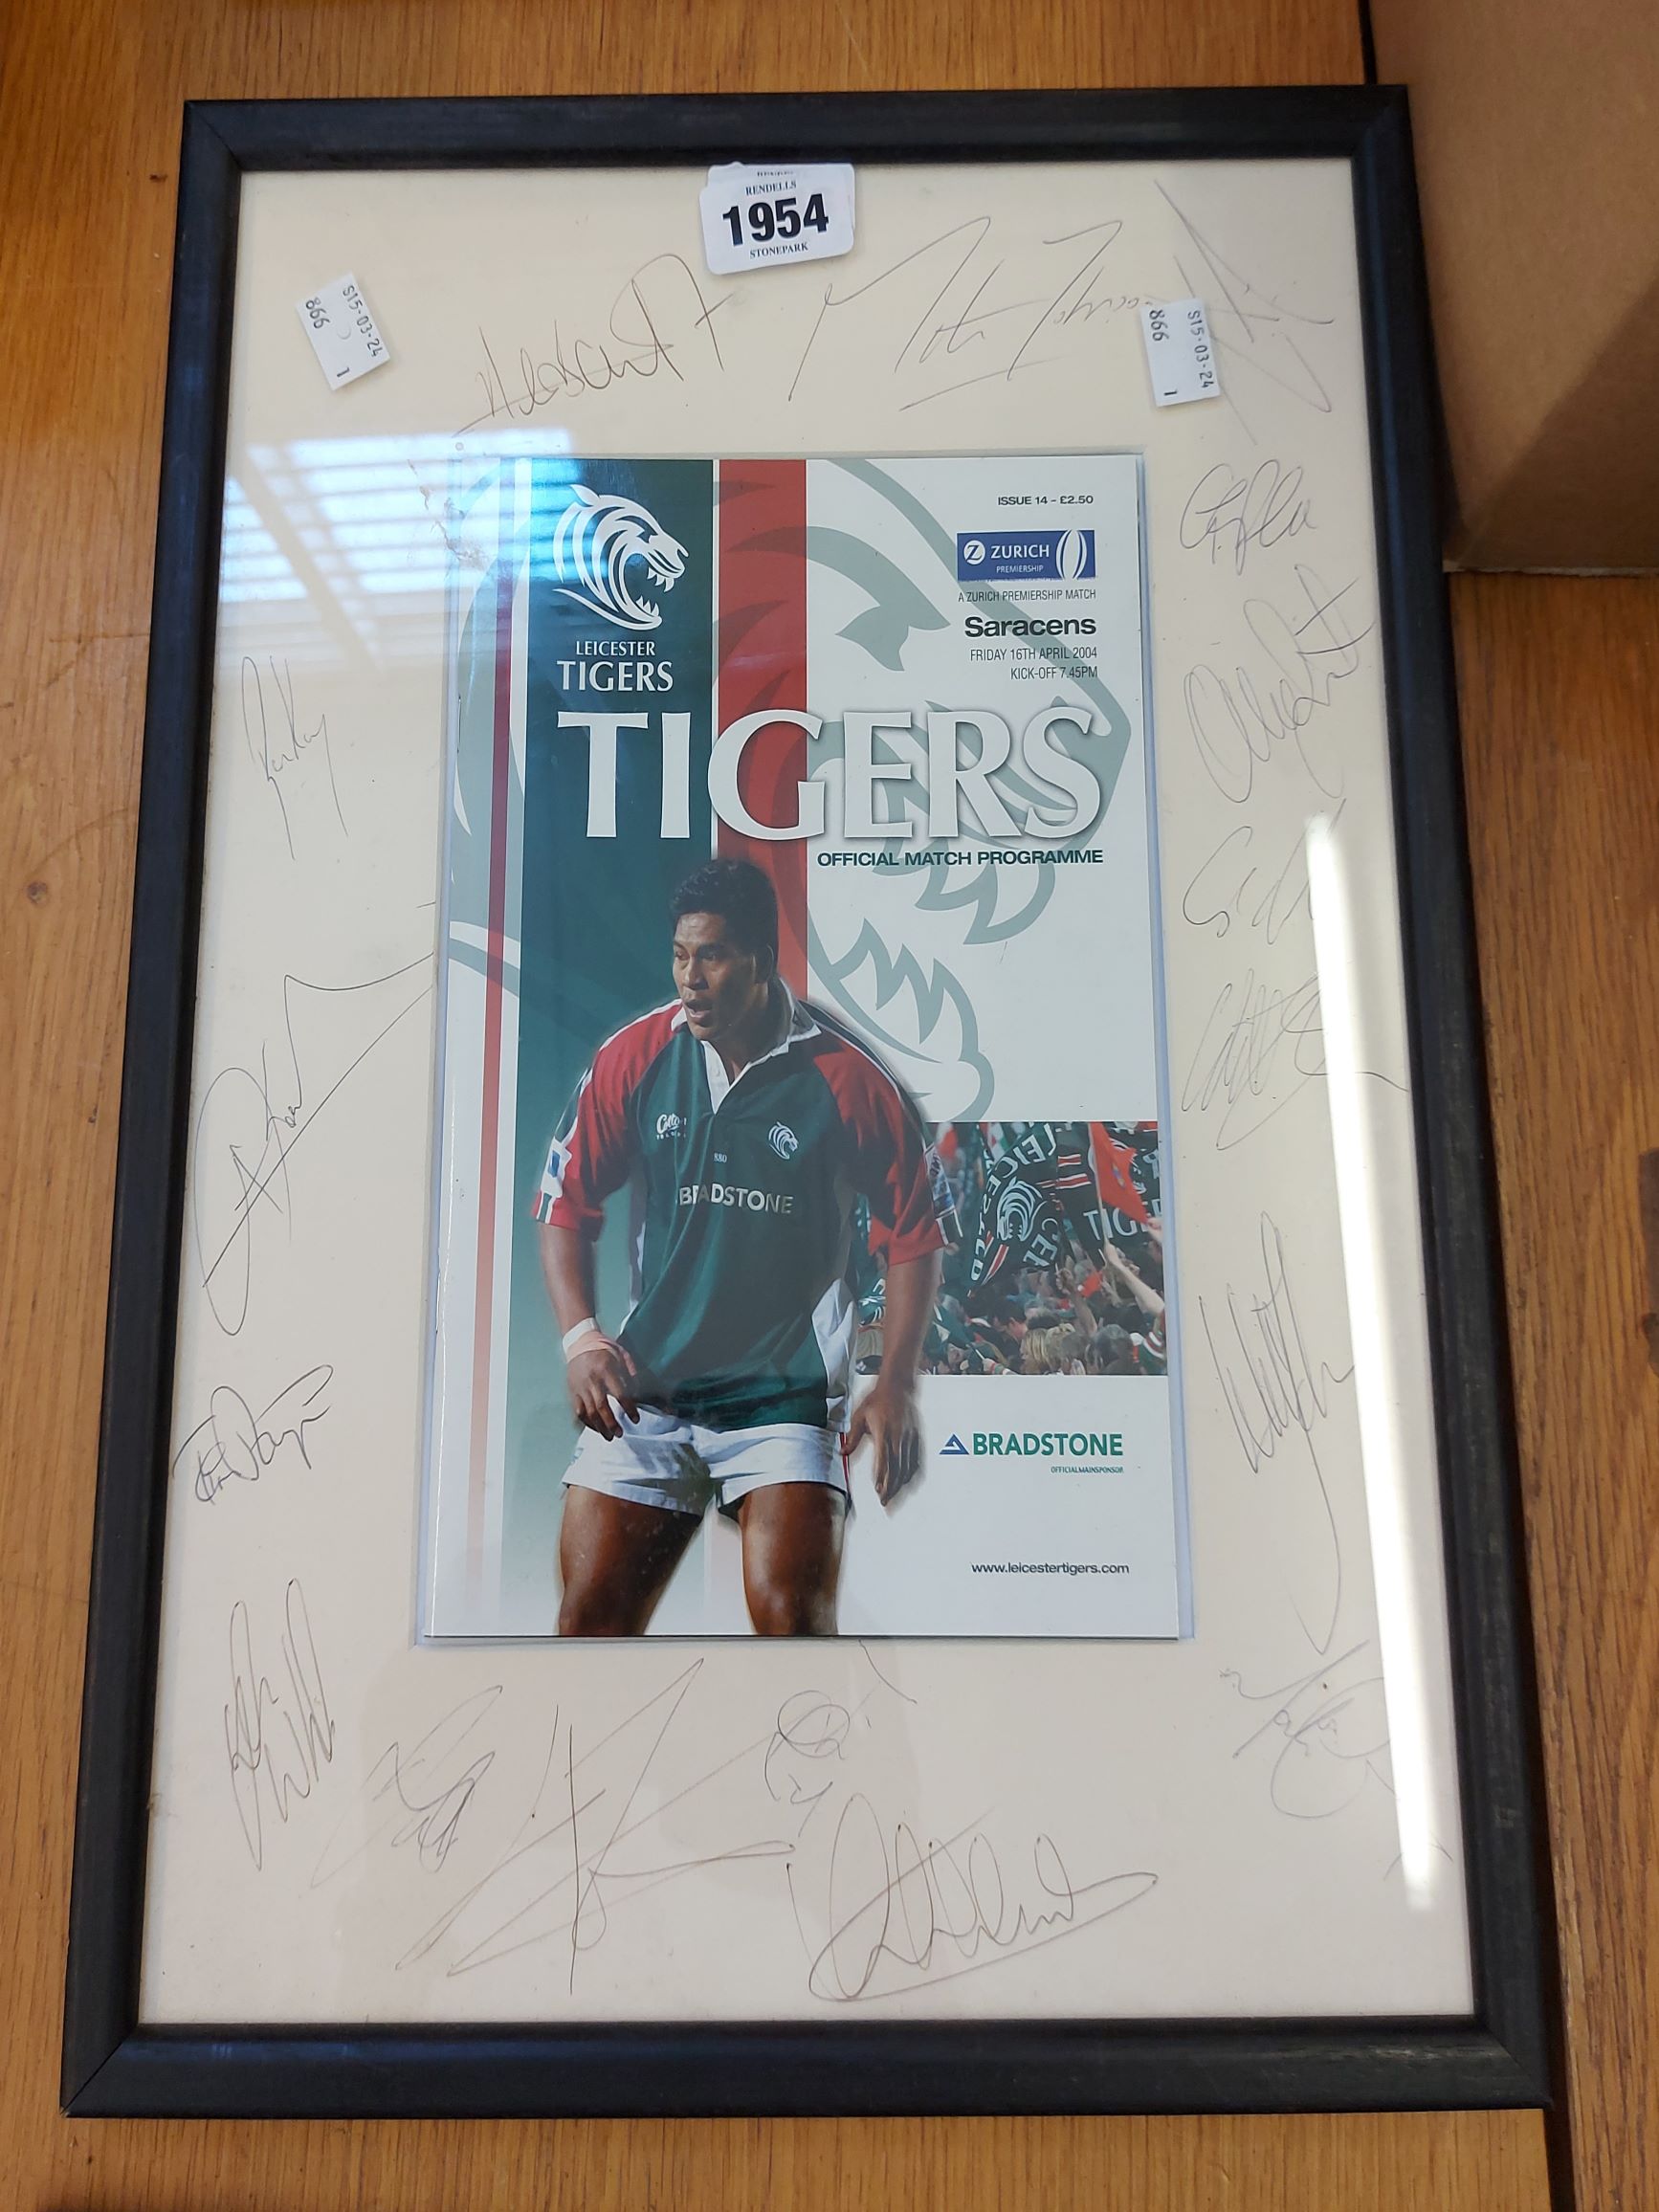 Leicester Tigers rugby club: a framed presentation match programme for April 16th, 2004 - with